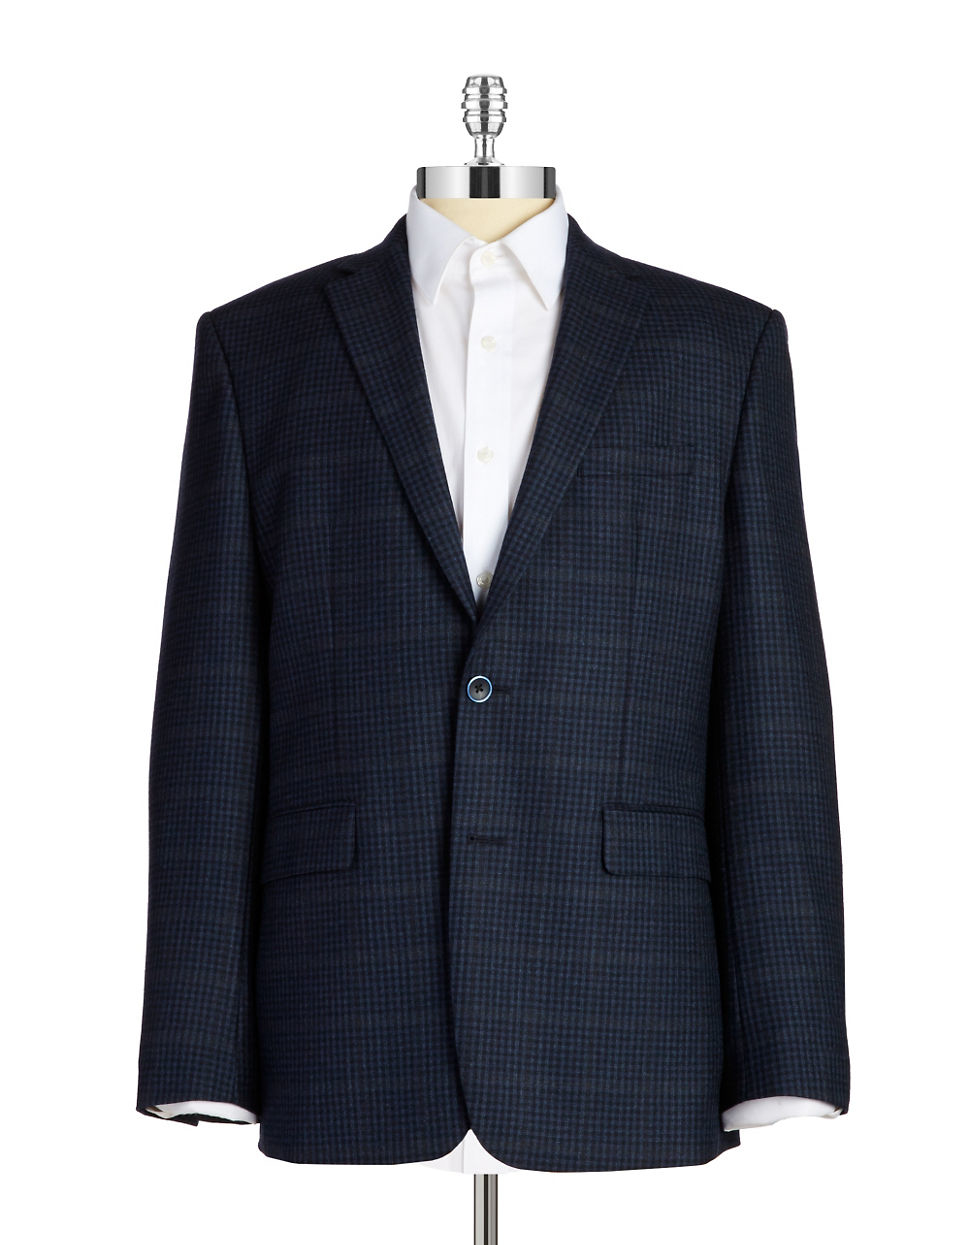 Lyst - Vince Camuto Checkered Wool Blazer in Blue for Men